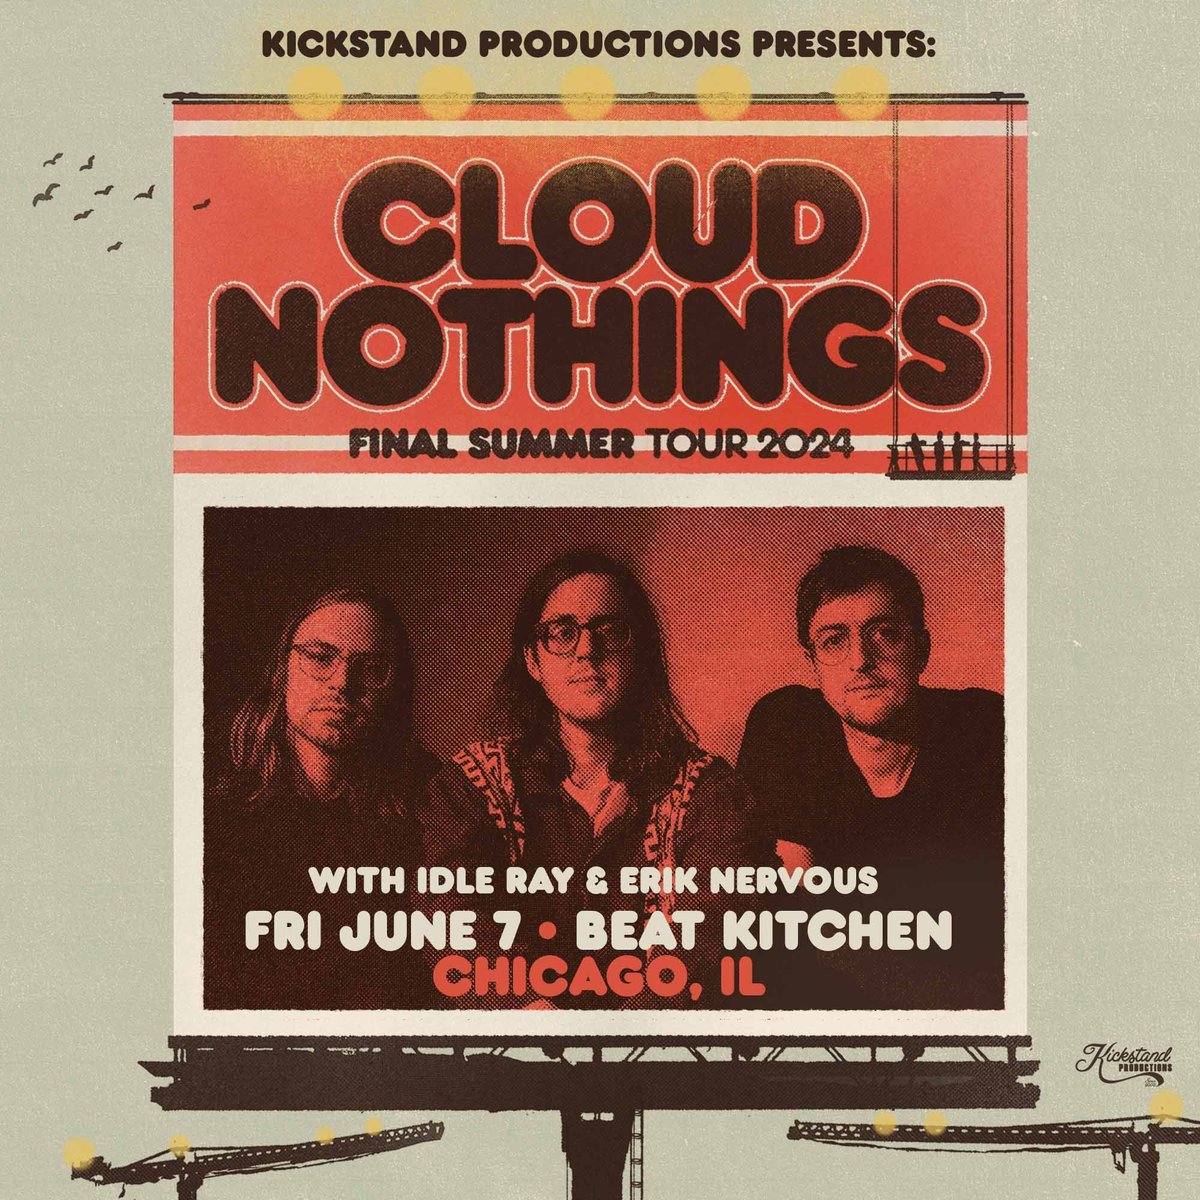 Don't miss @CloudNothings live at @BeatKitchenBar on June 7th @ 8:30pm! Get ready for a night of raw energy and incredible tunes! Click the link below for the chance to win a pair of FREE tickets! 🤘 ENTER FOR FREE TICKETS: forms.gle/LaJNZSuJYpfjsp…